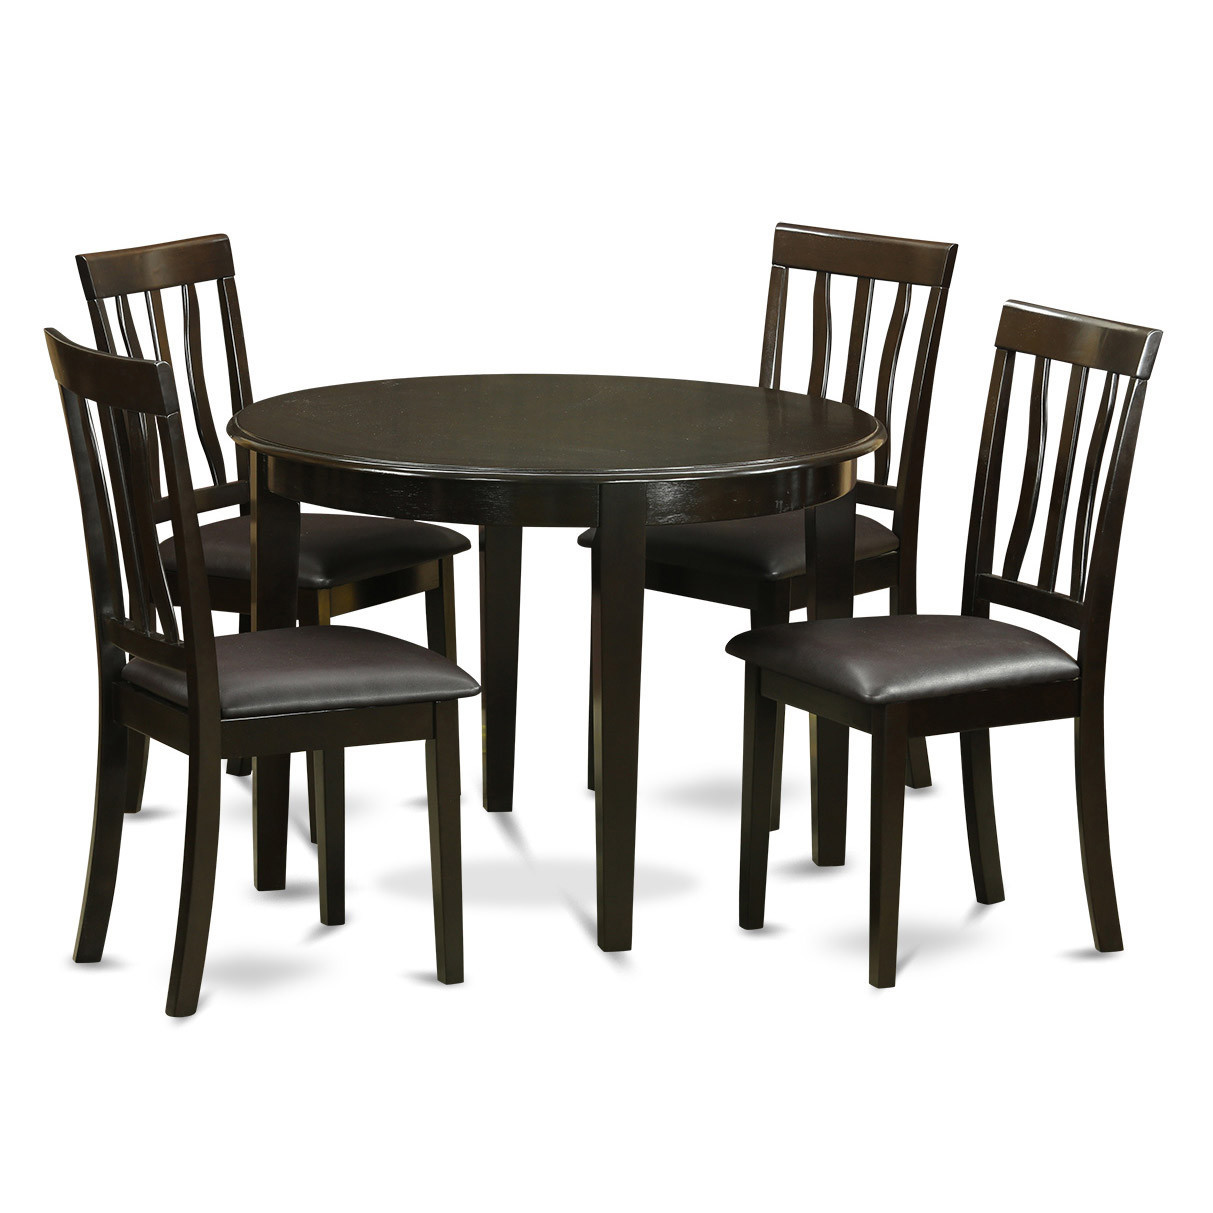 Small Kitchen Table Sets
 Wooden Importers Boston 5 Piece Dining Set